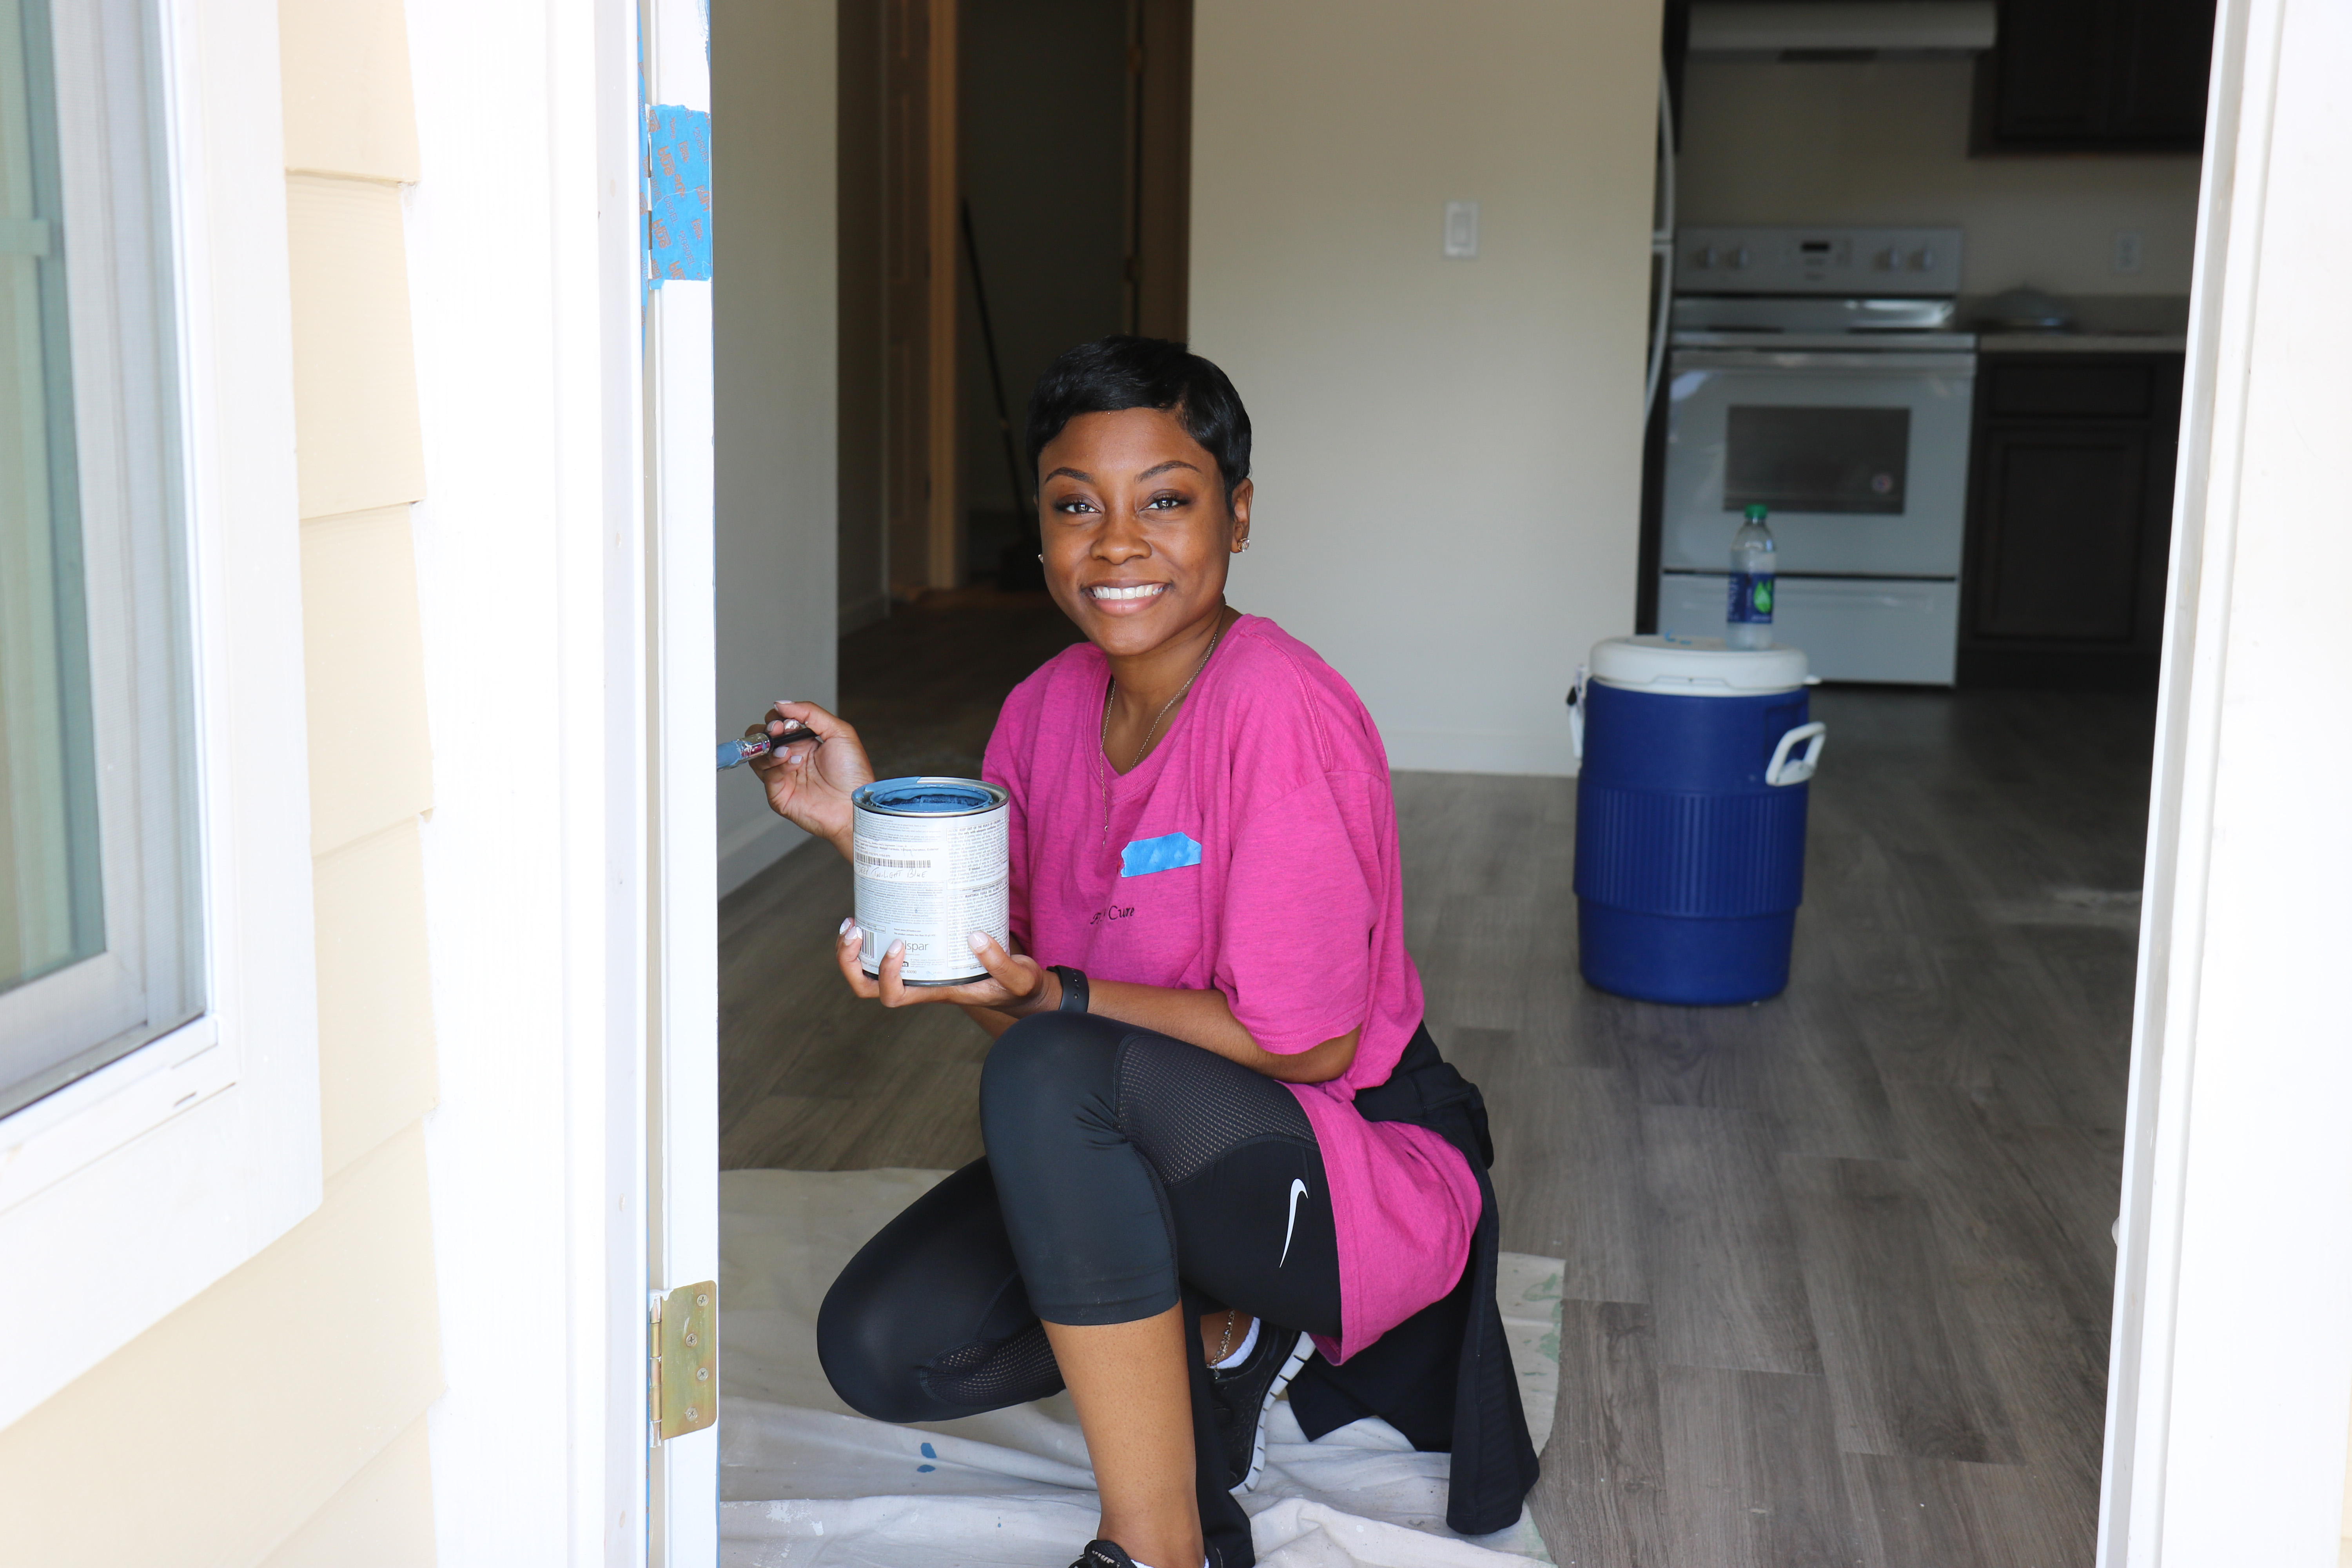 Smiling volunteer painting exterior door frame with blue cooler and kitchen in background